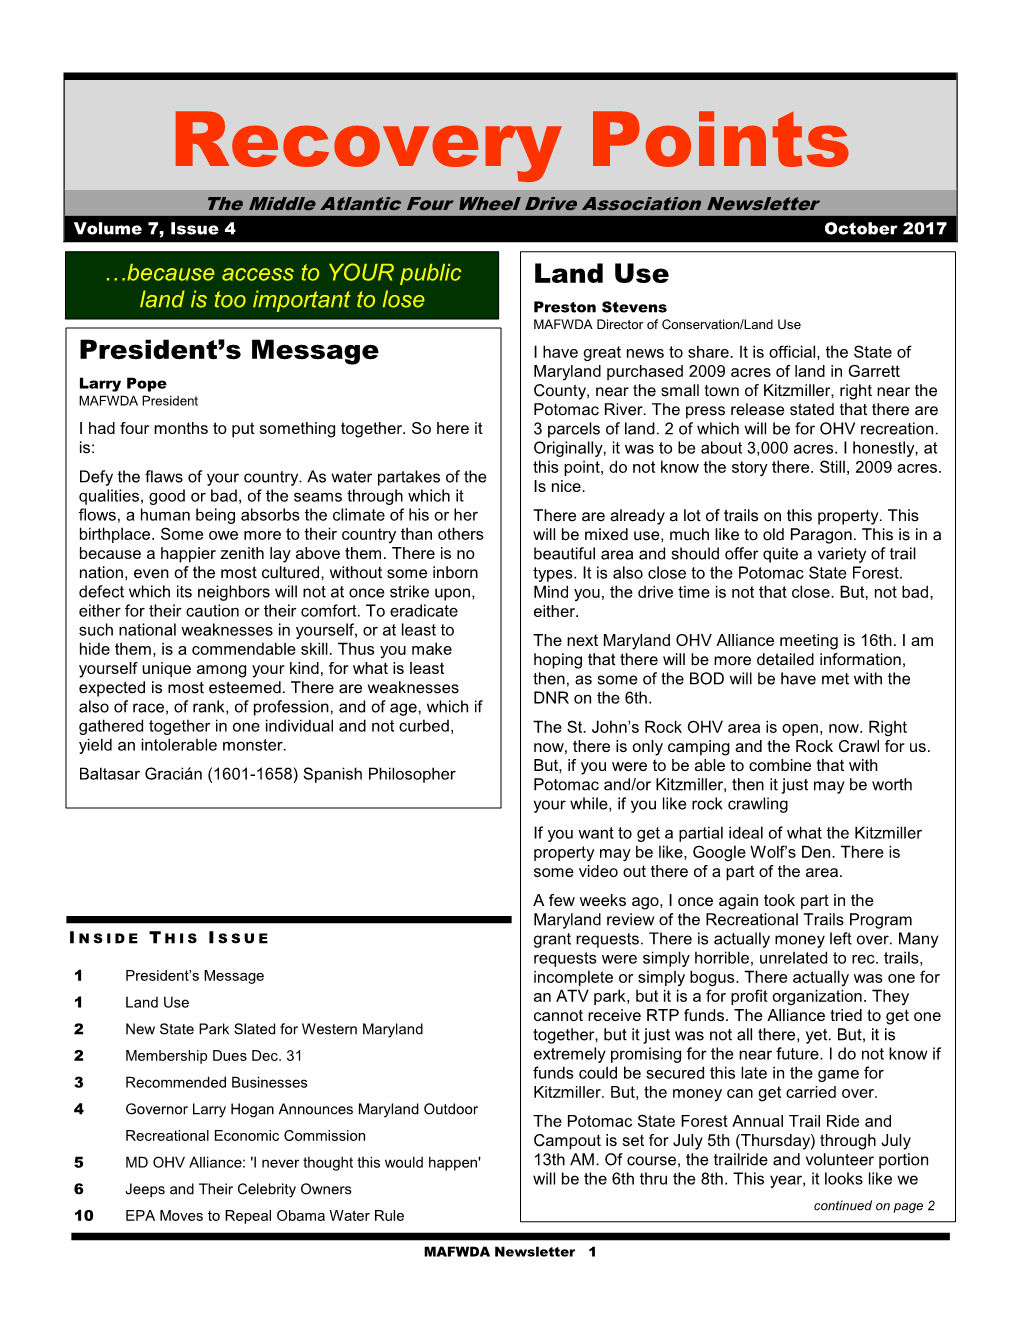 Recovery Points the Middle Atlantic Four Wheel Drive Association Newsletter Volume 7, Issue 4 October 2017